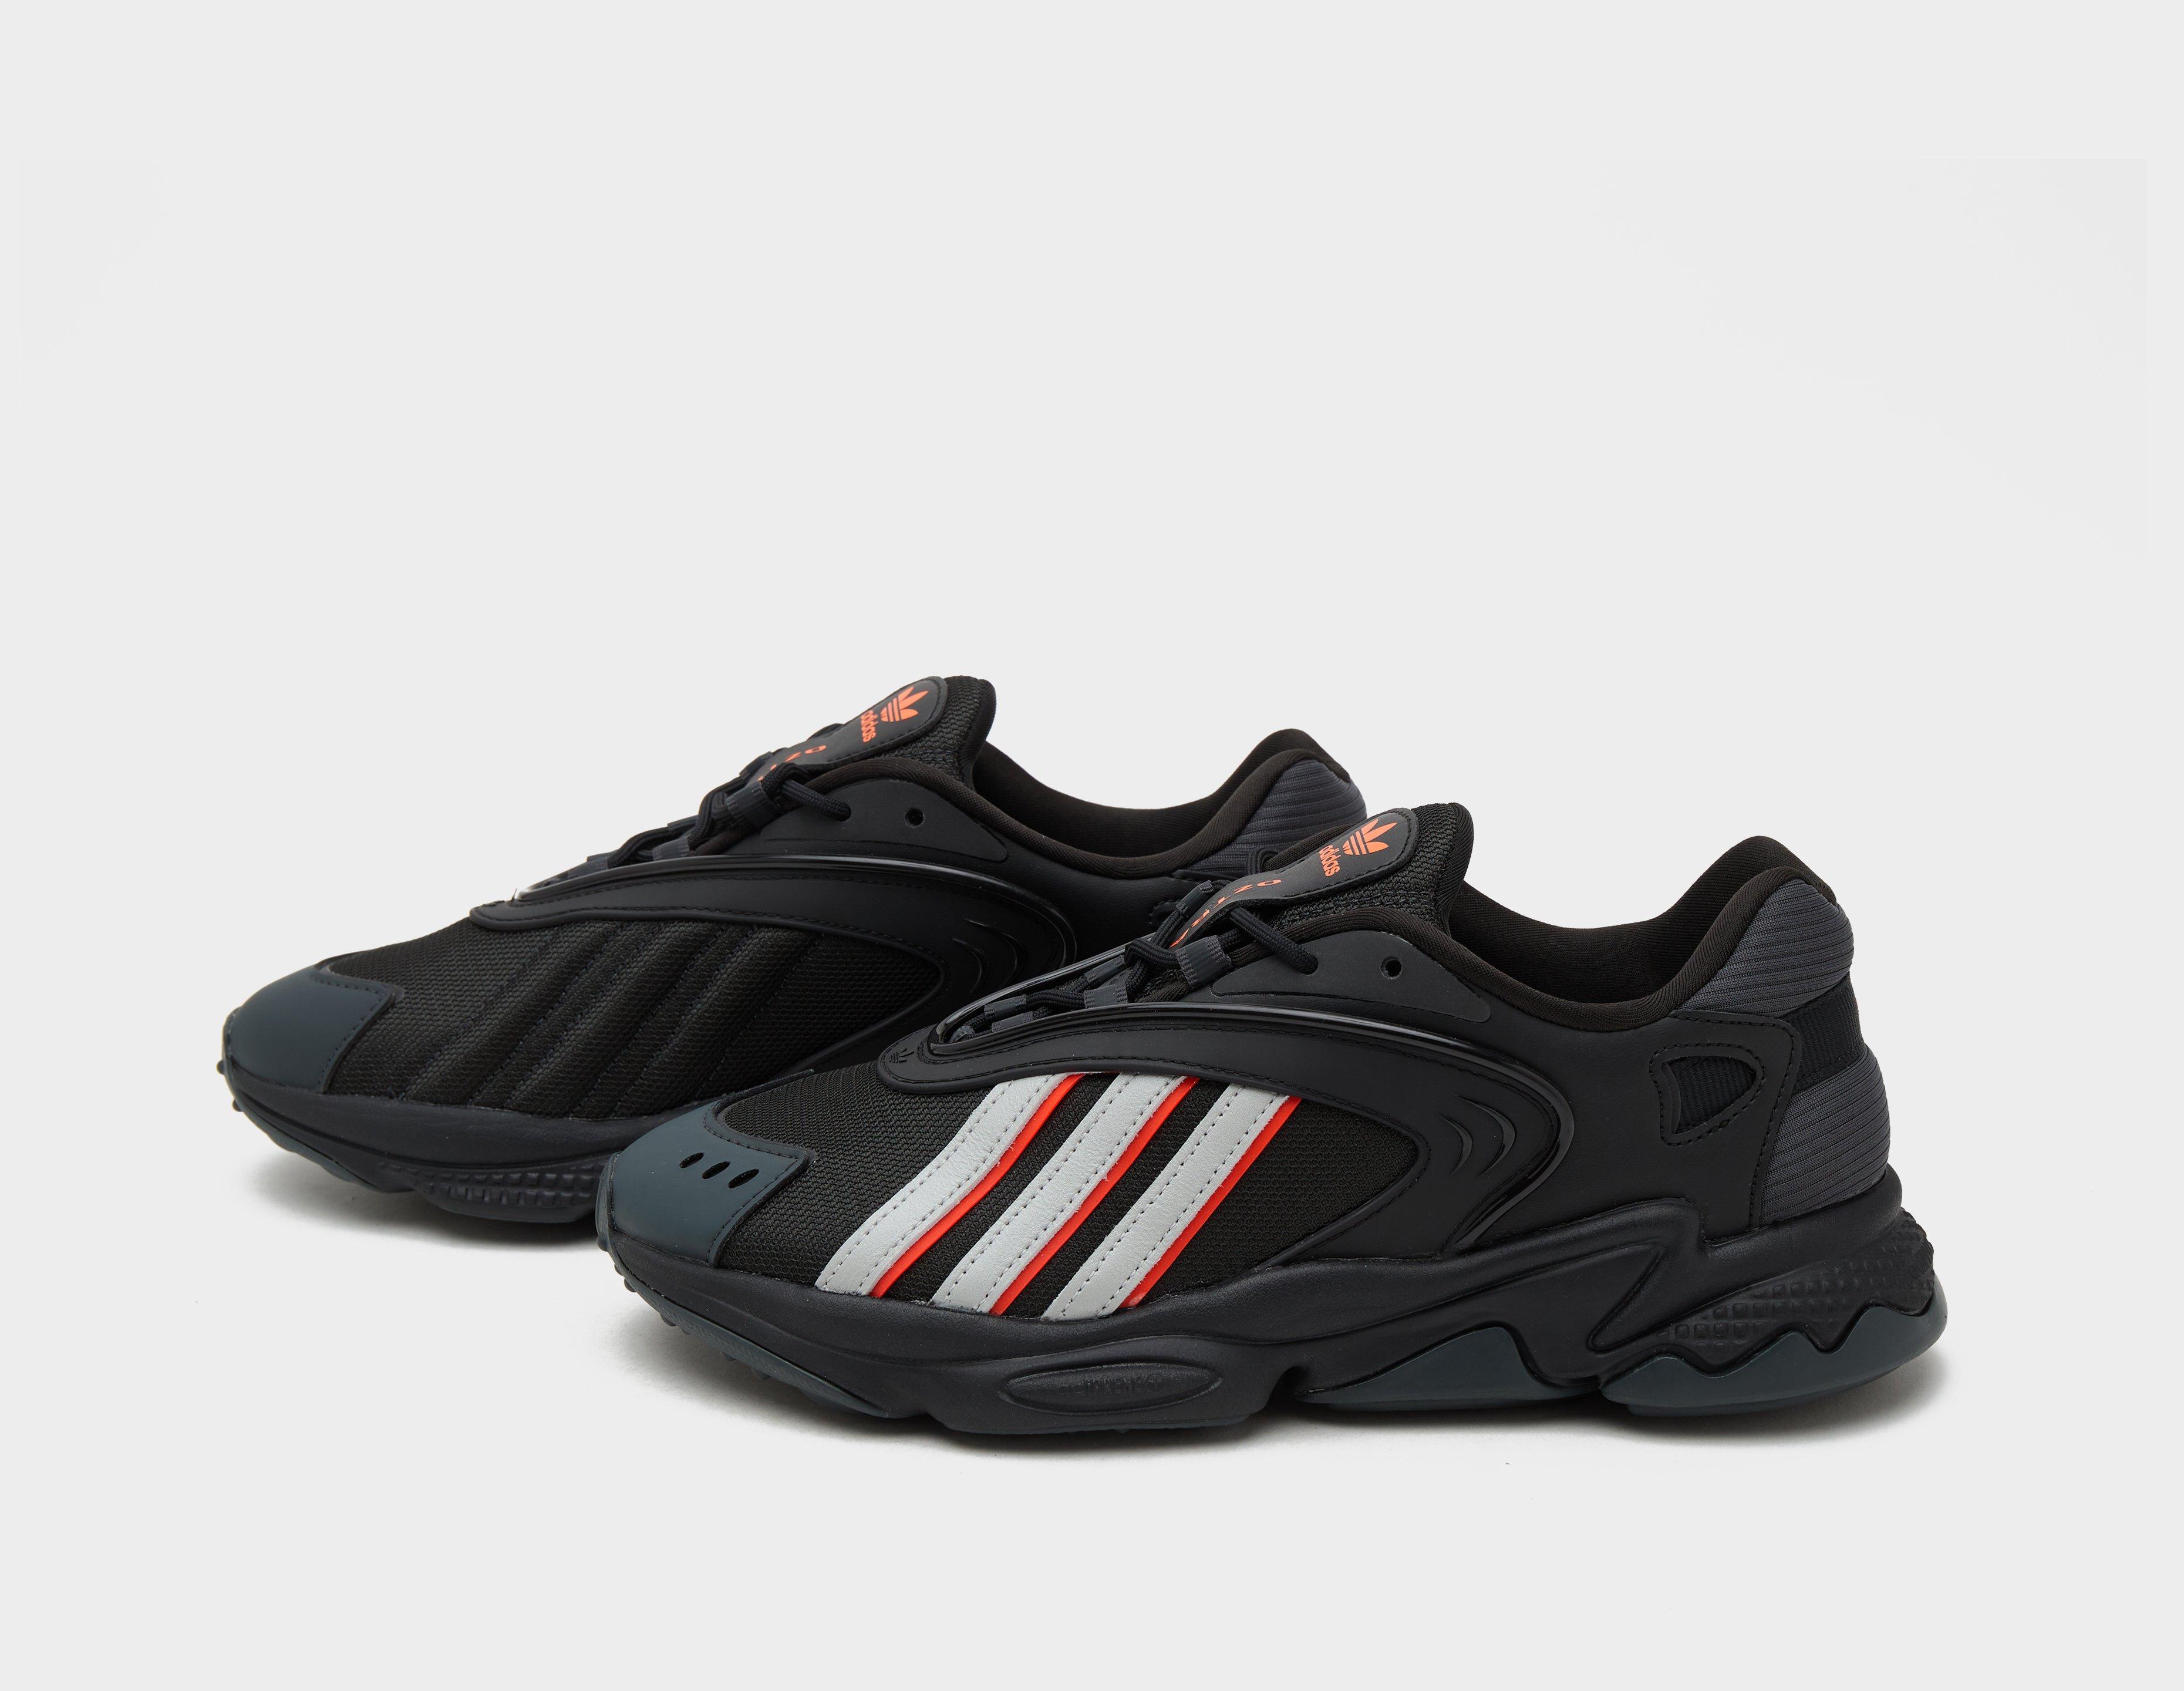 nederdel Produktion Hare Classicfuncenter? | Adidas trae young 2 us678910112 | Black adidas  Originals Oztral